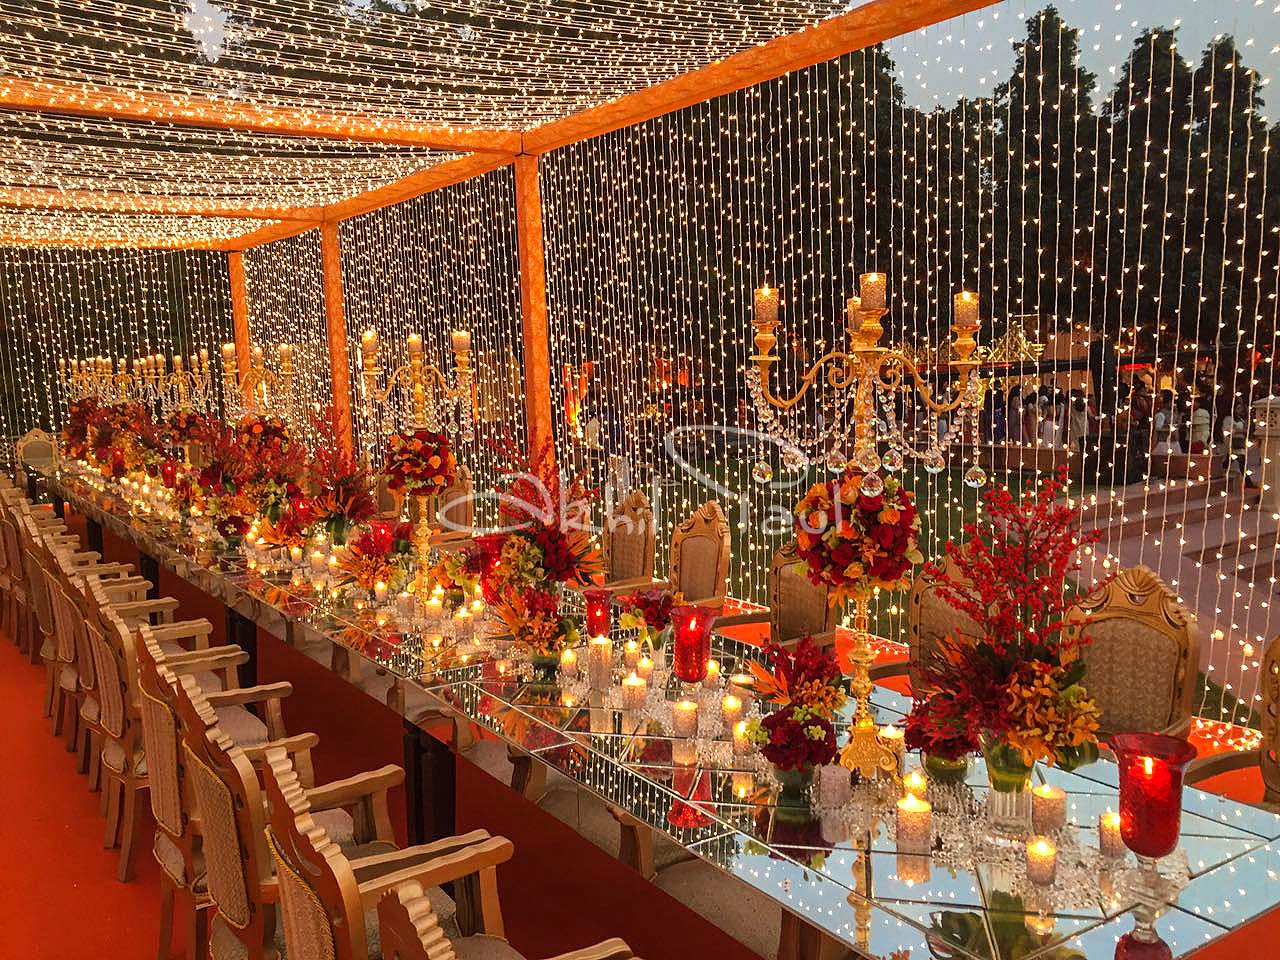 Outdoor Long Dinner Table Decor with Fowers & Lights